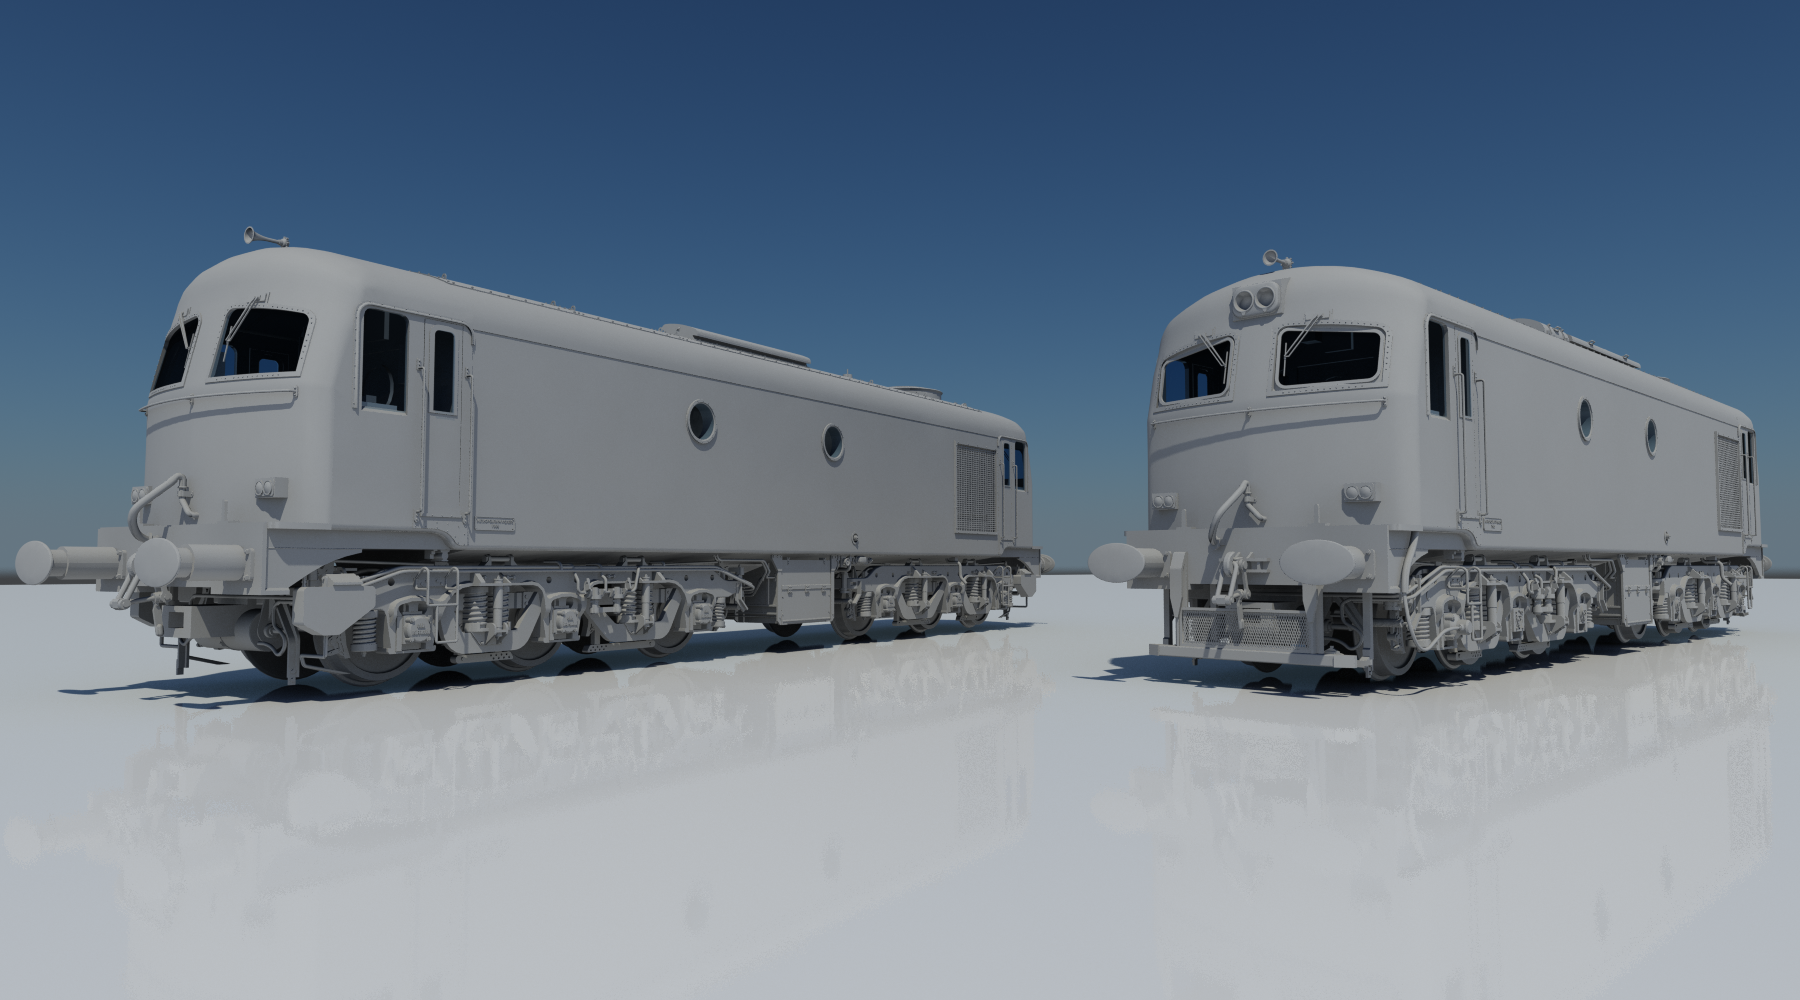 Announcing A Class; Our First Locomotive!